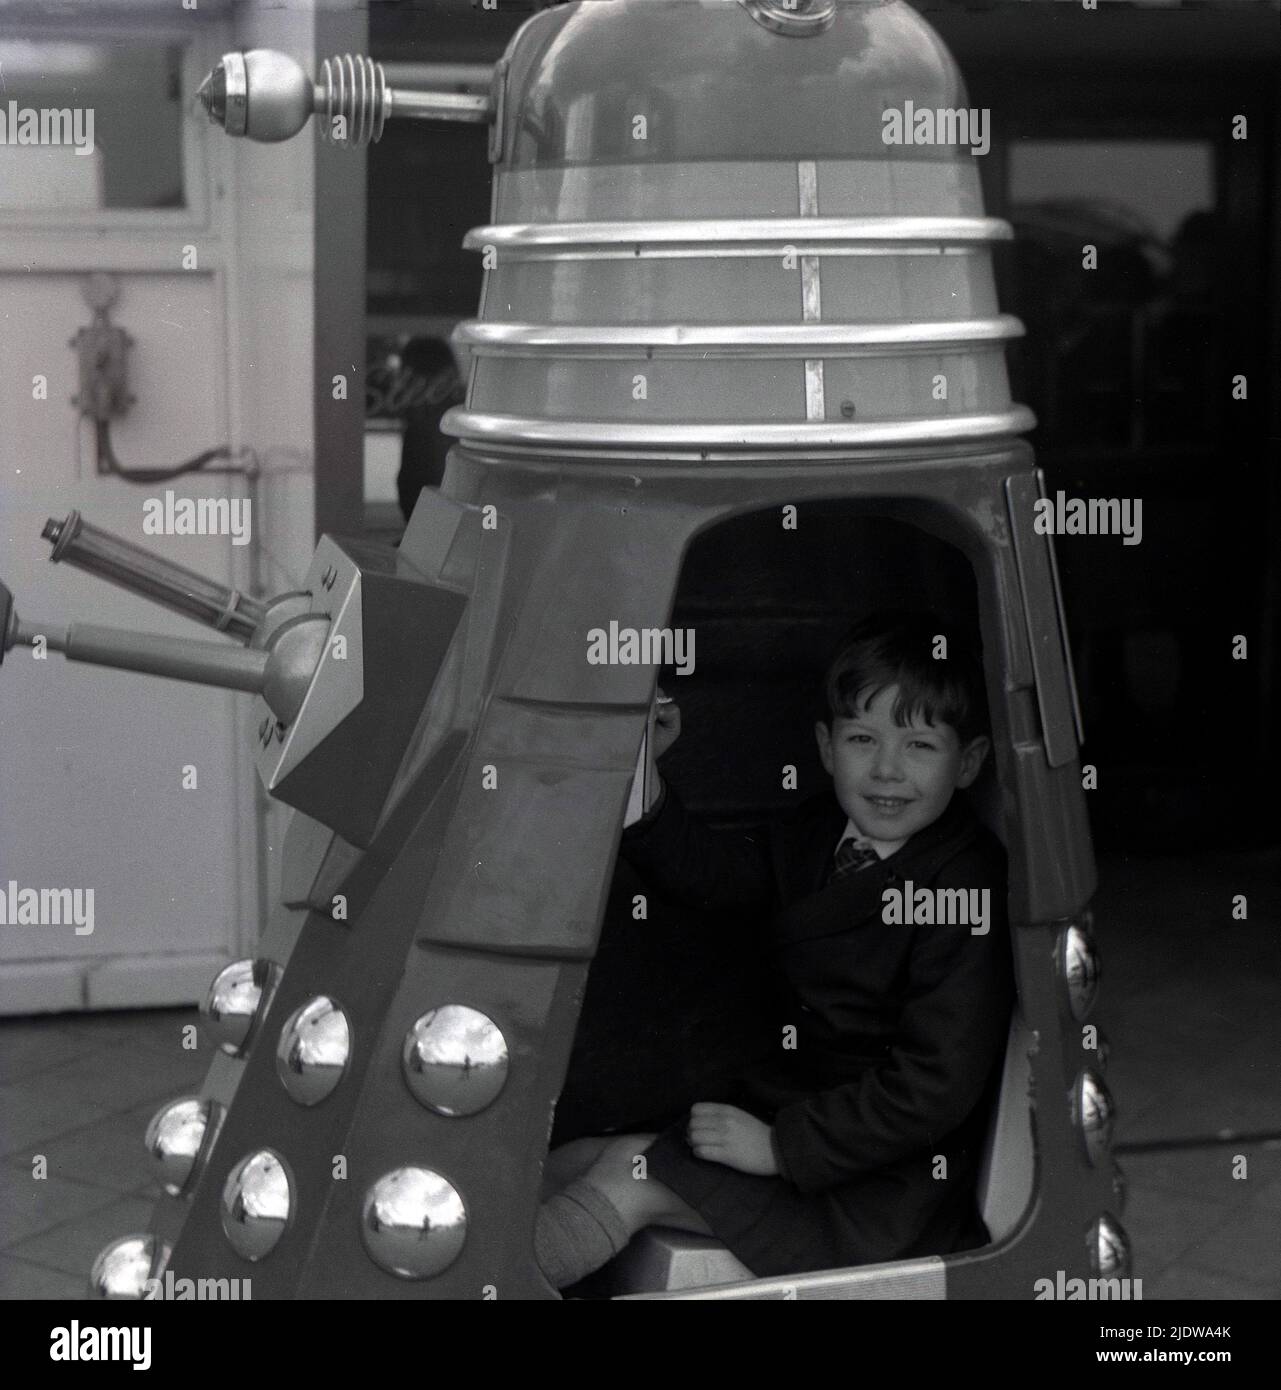 1967, historical, a young boy sitting in a Dalek, England, UK. A fictional extraterrestrial race of mutant or robots, the Daleks first appeared in the Briitsh science fiction television programme Doctor Who in 1963. Created by Terry Nation, the Daleks soon became the BBC show's most popular character. The aliens distinctive looking shells or travel machines were designed by Raymond Cusick, who as a BBC salaried employee at the time, didn't receive any of the revenues generated from the Daleks merchandise, unlike Nation who did, as was an independent script writer. Stock Photo